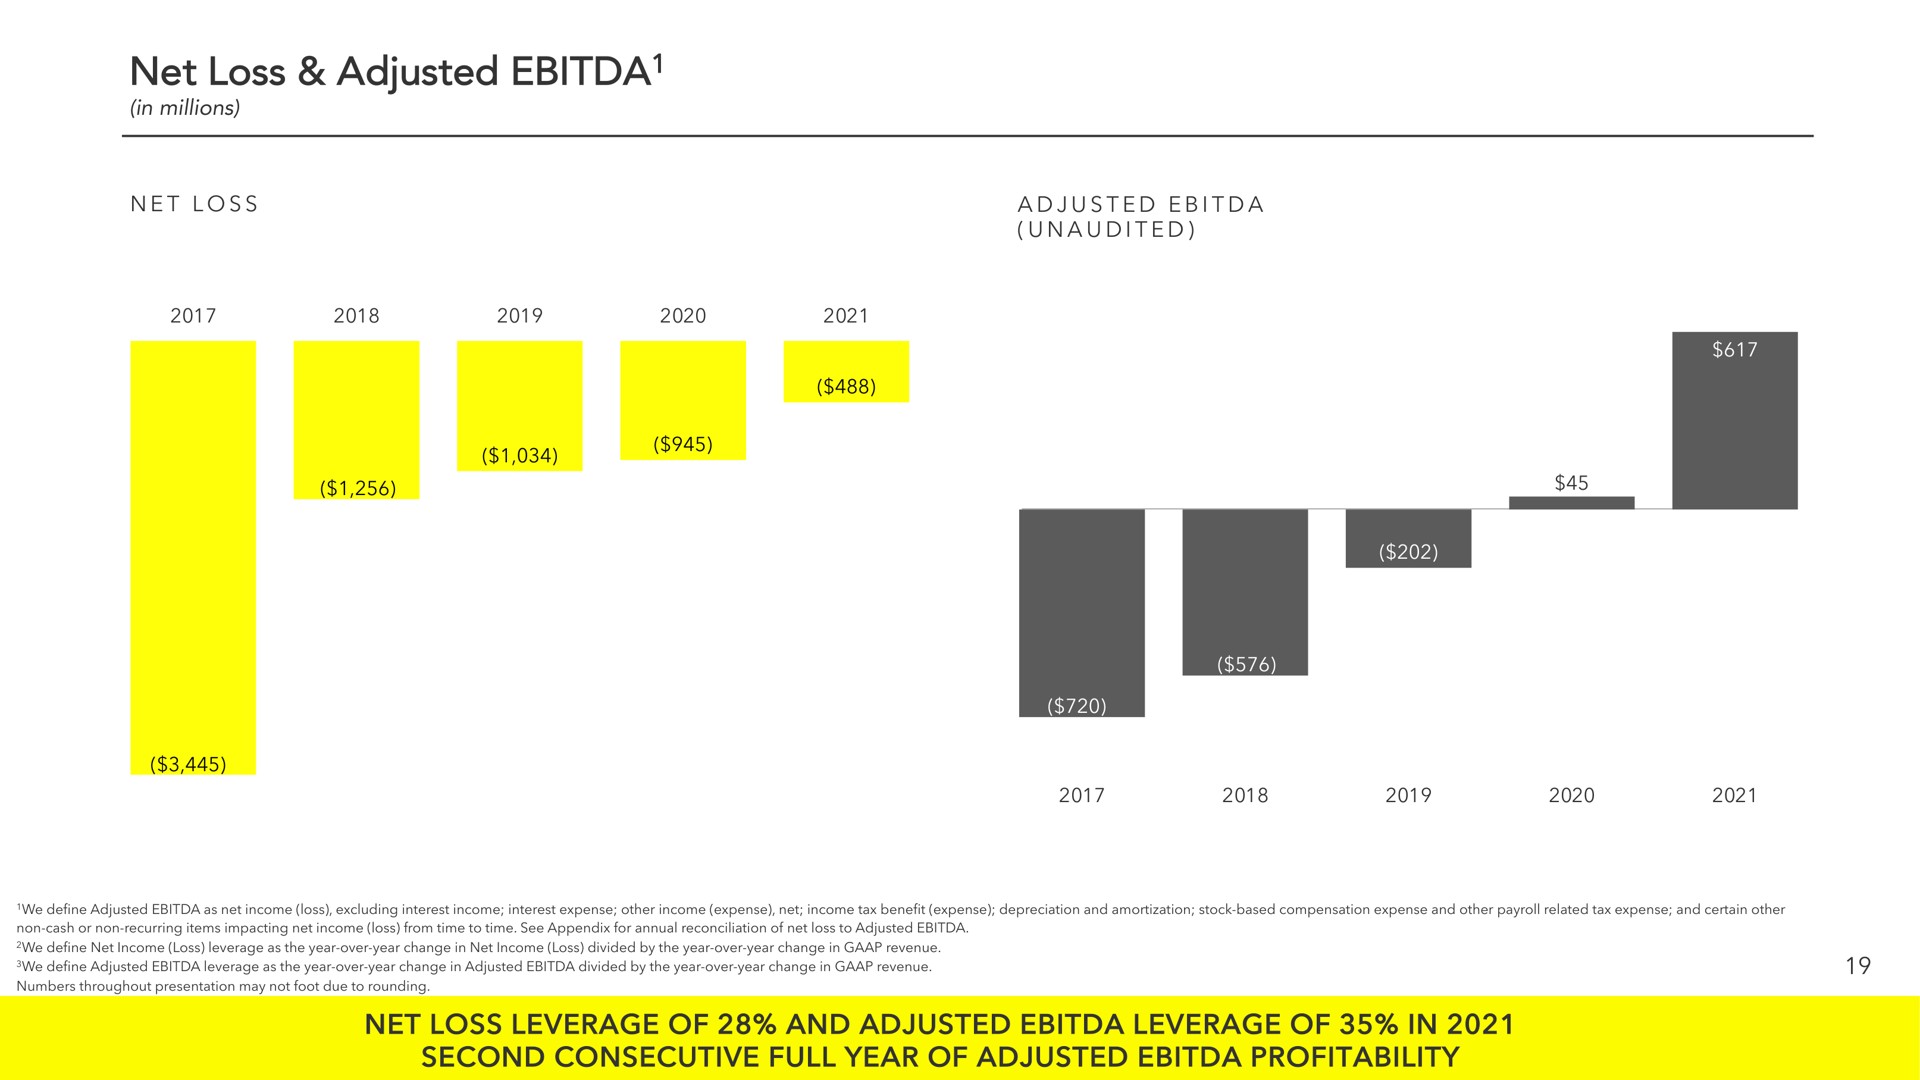 net loss adjusted leverage of and leverage of in second consecutive full year of profitability | Snap Inc